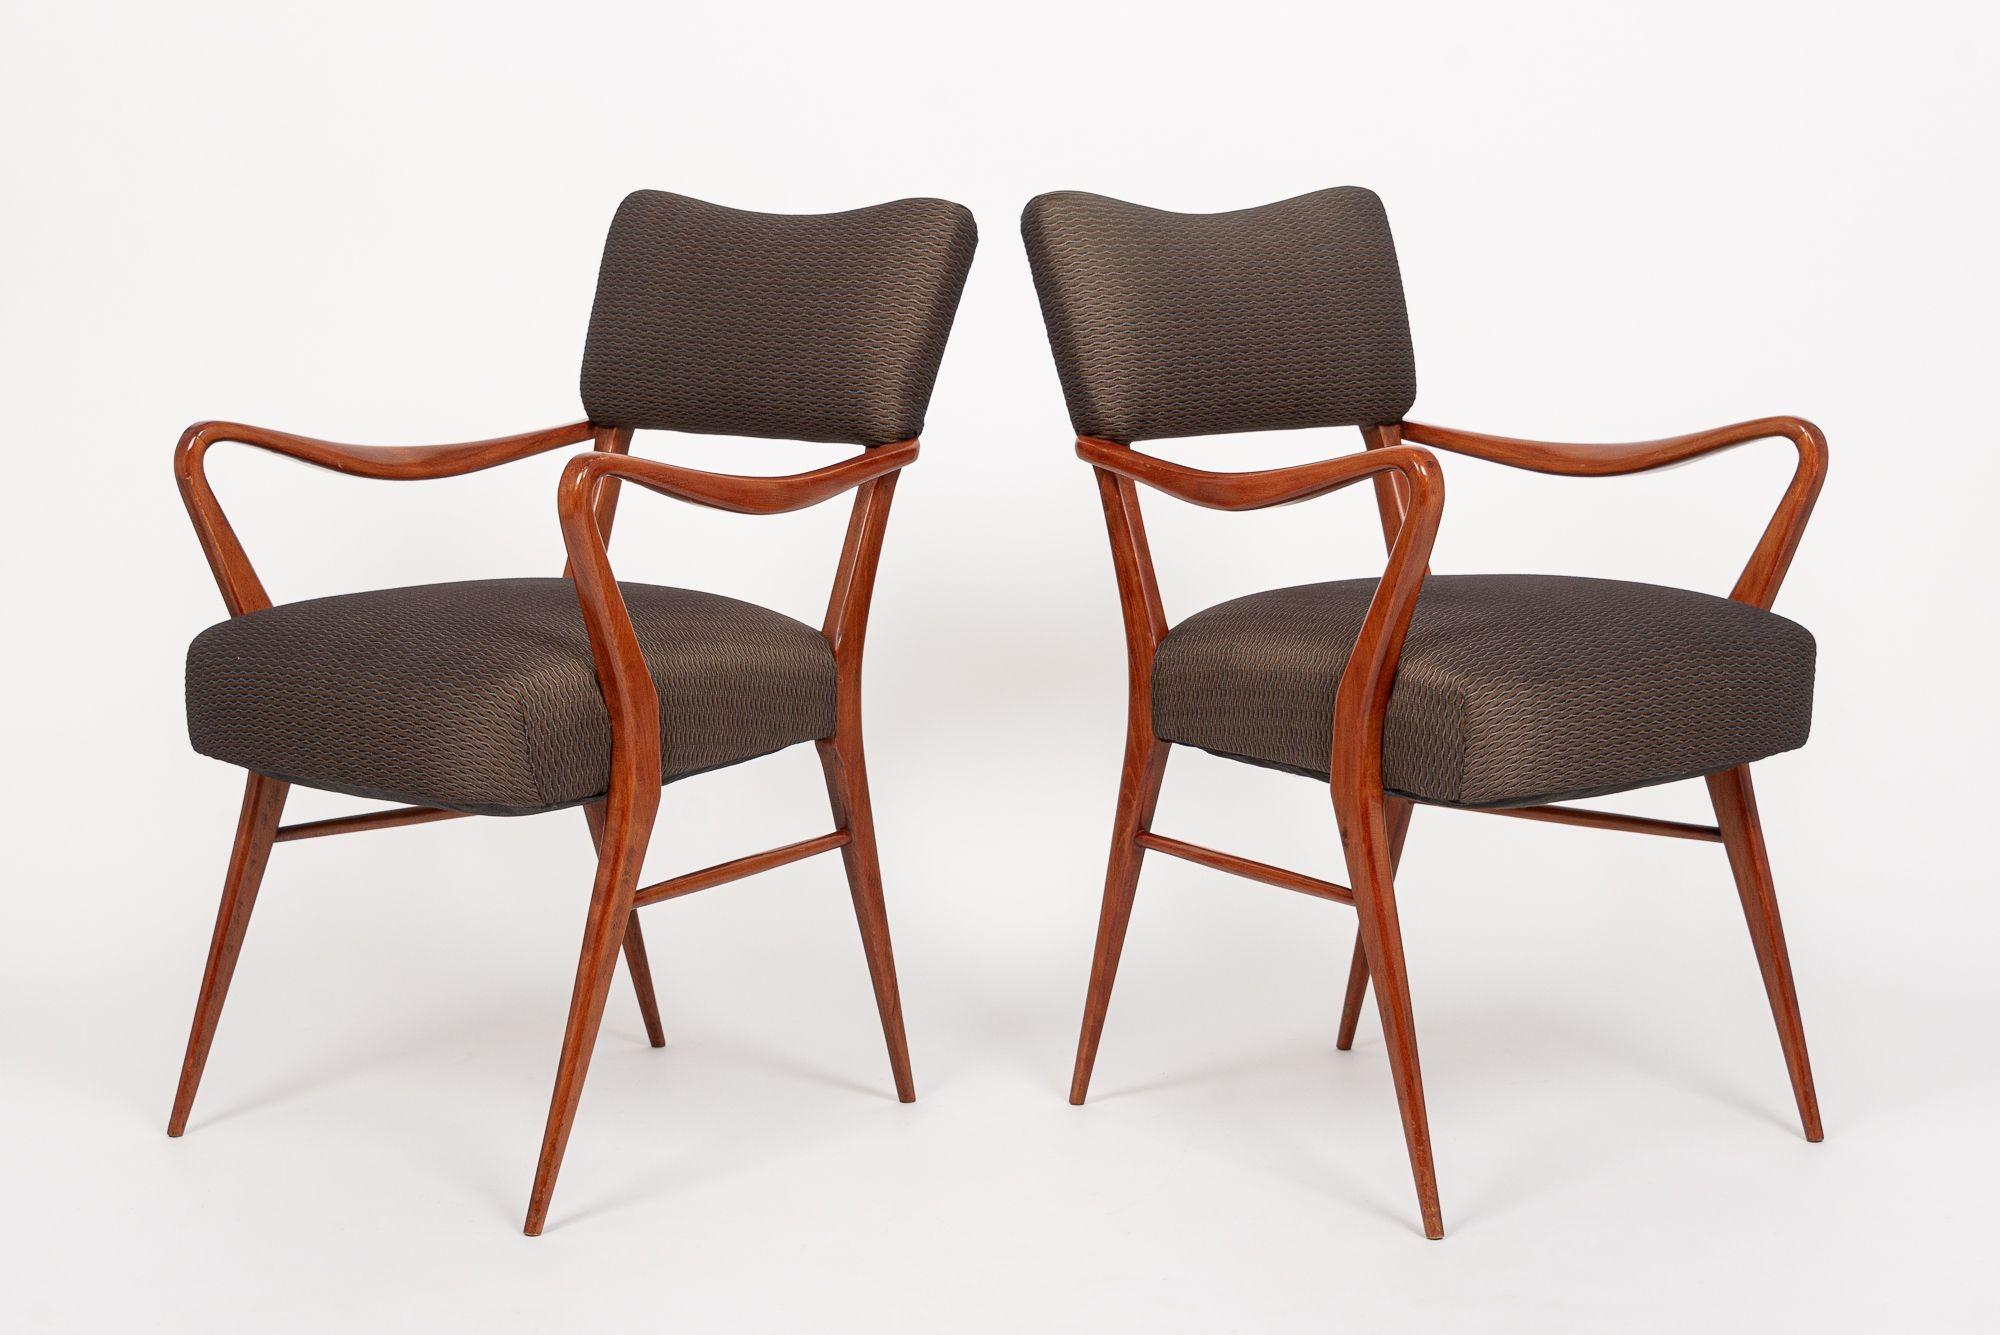 This beautiful pair of vintage mid century modern arm chairs attributed to mid century Italian designer Gio Ponti are circa 1950. The distinctive design features sculptural, lacquered solid wood frames with clean, elegant lines and gentle, organic